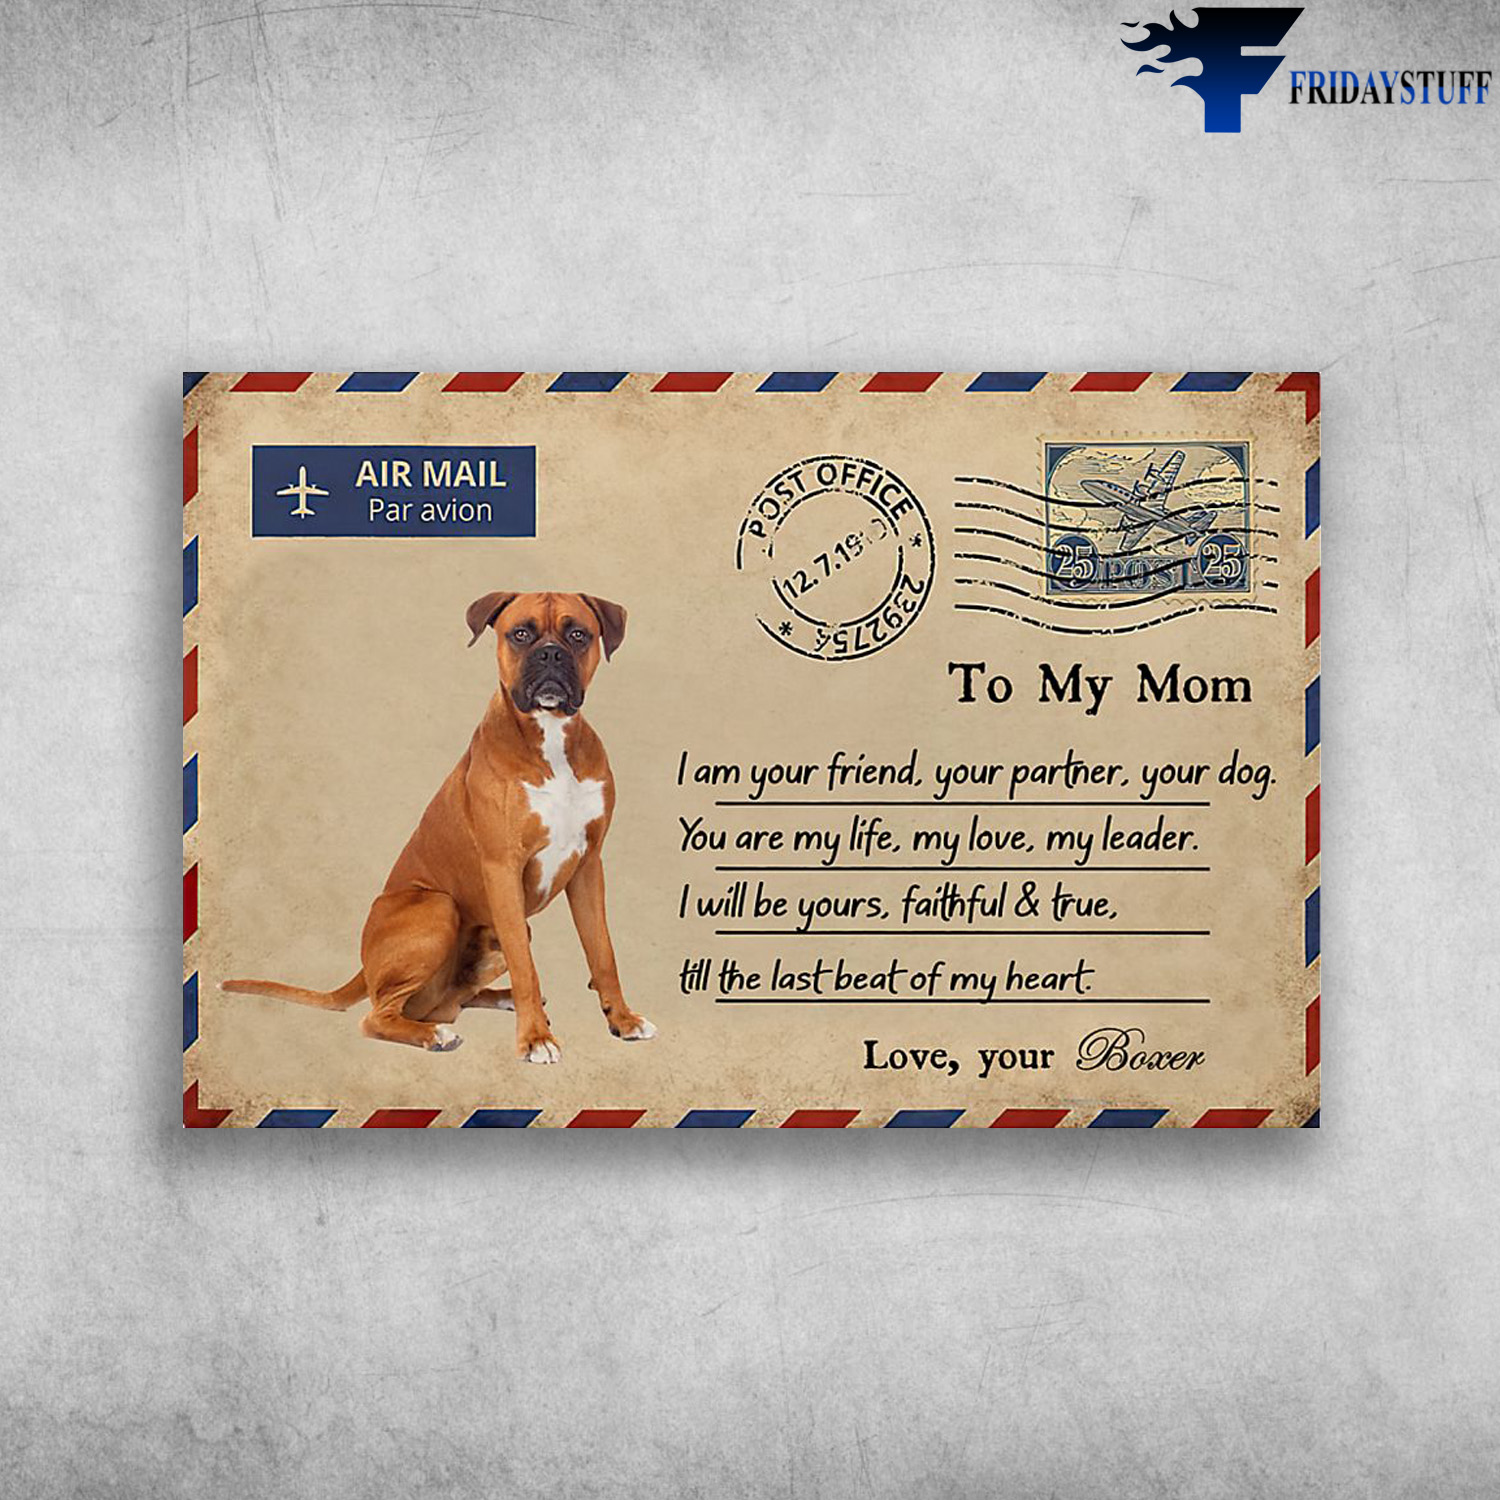 Boxer Dog – Air Mail Par Avion, To My Mom, I Am Your Friend, Your Partner, Your Dog, You Are My Life, My Love, My Leader, I Will Be Yours, Faithful And True, Till The Last Beat Of My Heart, Love, Your Boxer